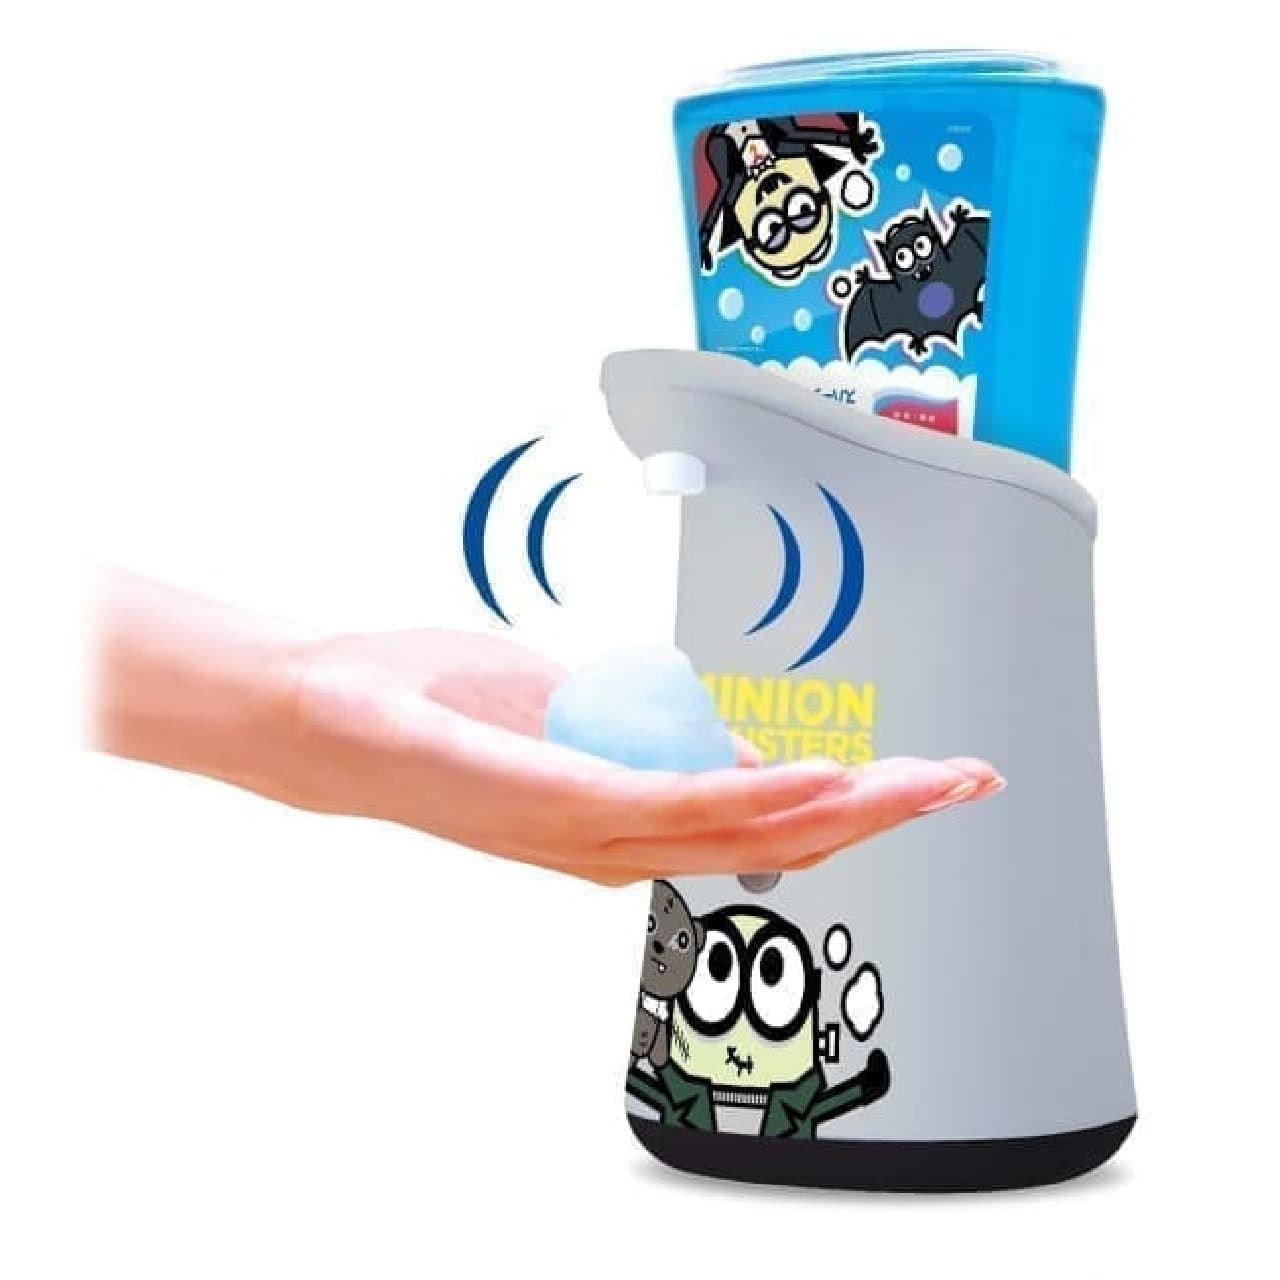 Minions are back! Limited design of "Muse No Touch Foam Hand Soap" that automatically produces bubbles